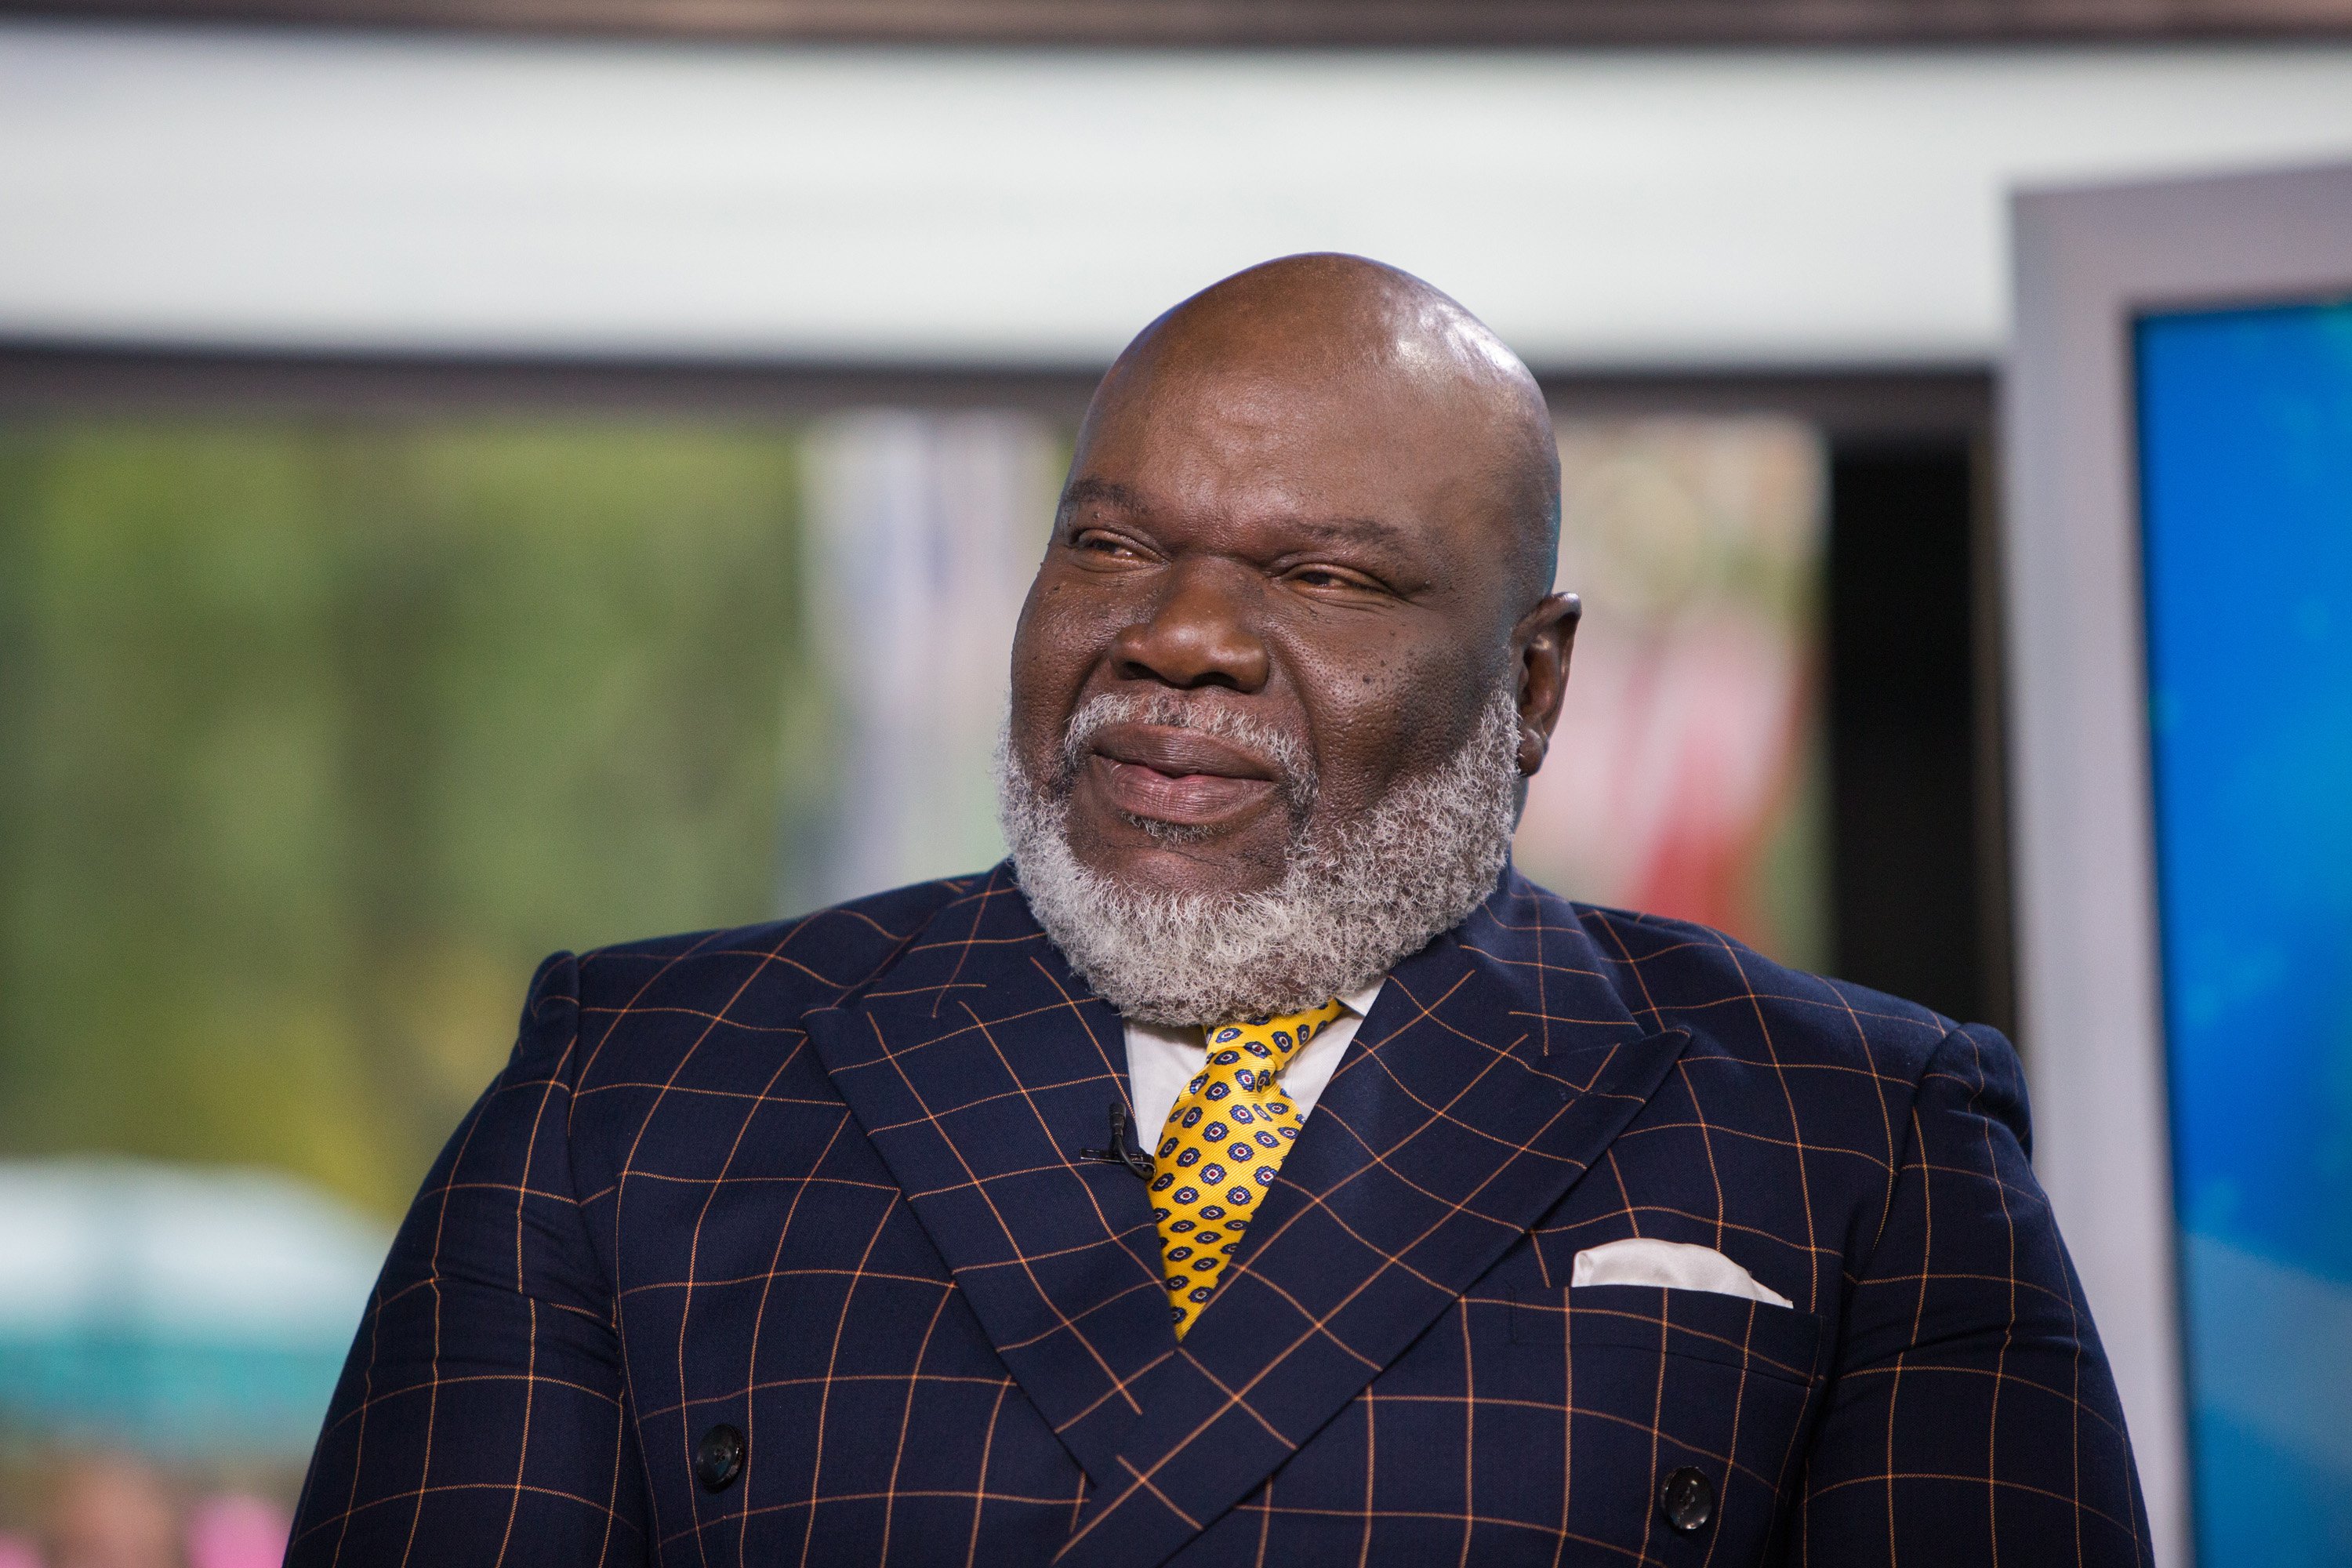 Bishop T.D. Jakes on the set of "Today" on Monday, October 9, 2017. | Source: Getty Images